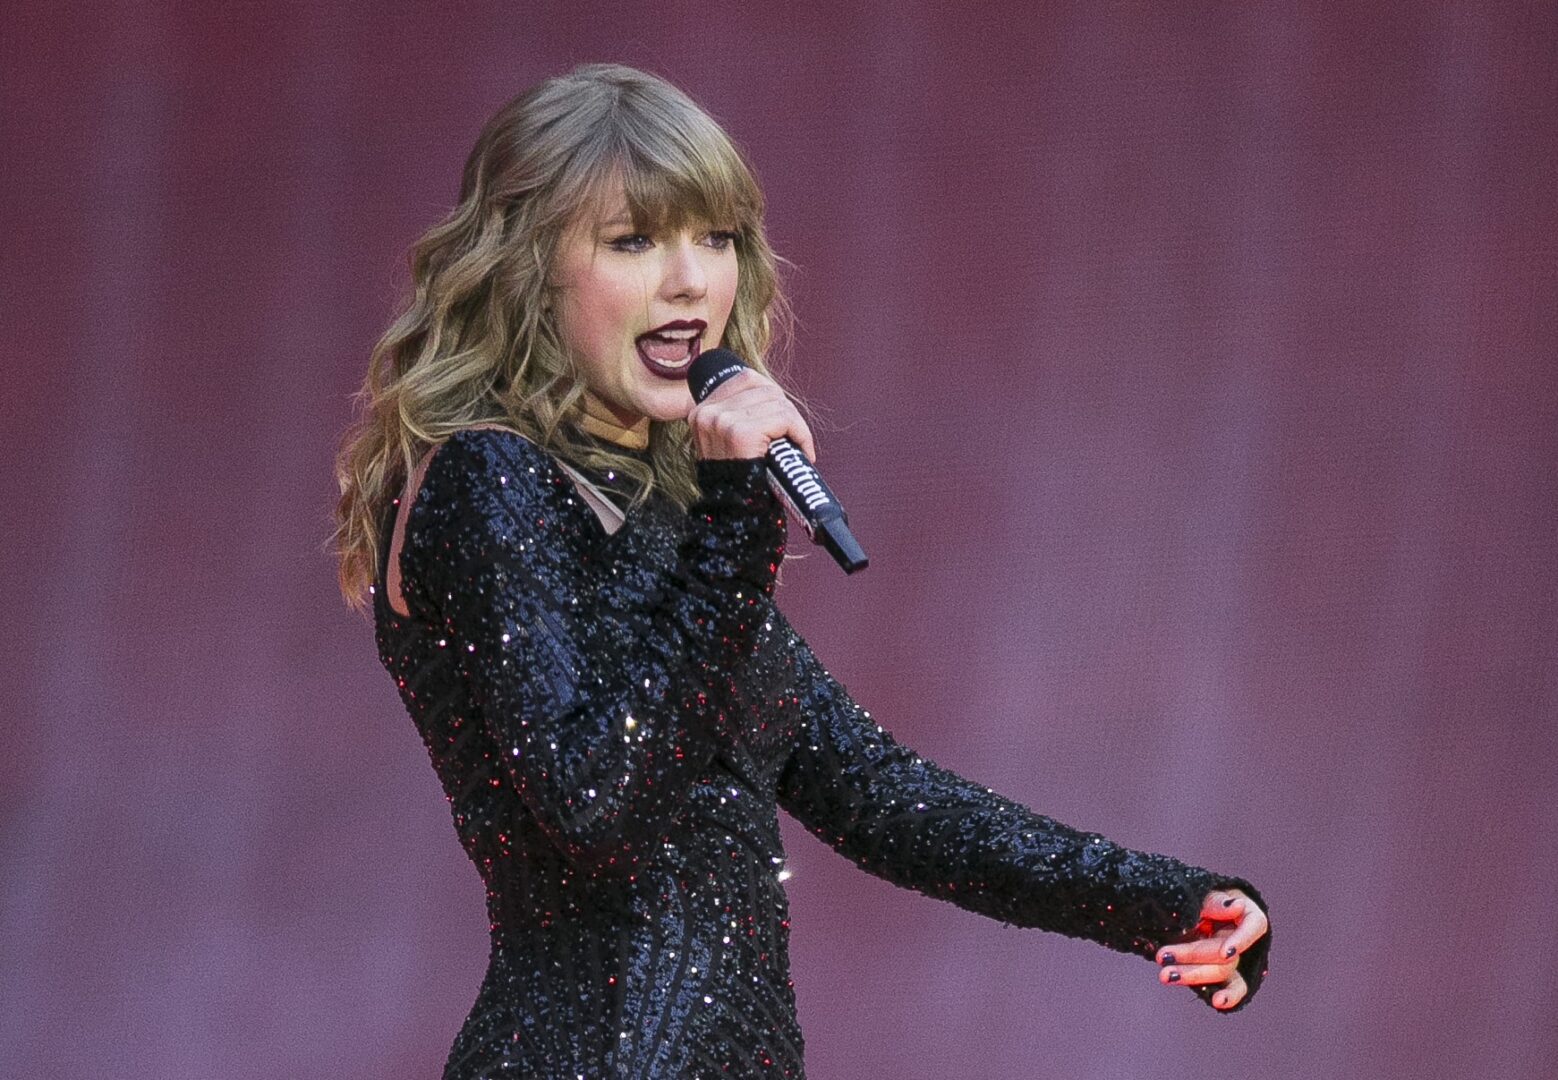 Singer Taylor Swift performs on stage in a concert at Wembley Stadium on June 22, 2018, in London.